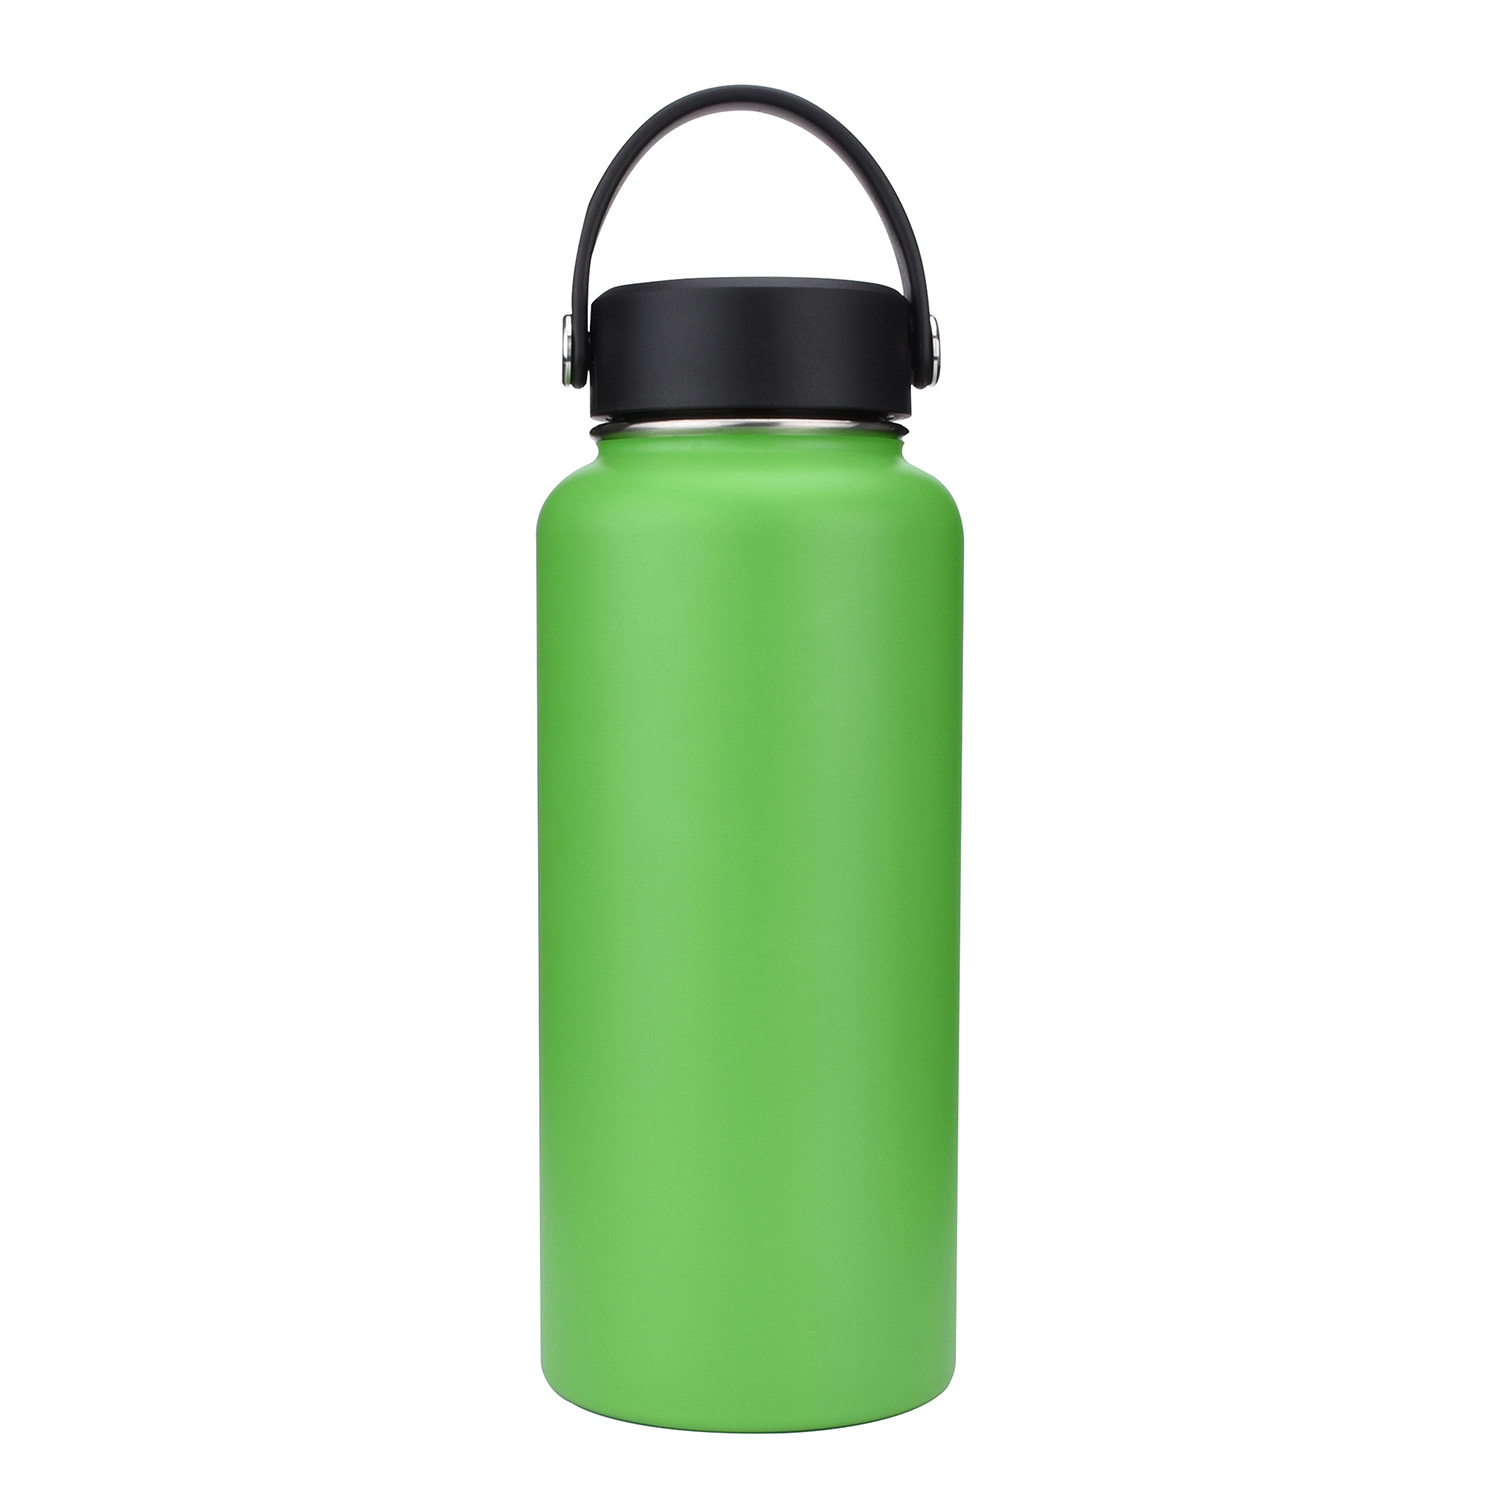 Sometimes the best things don't come in small packages. Meet the new 6, hydroflask stanley